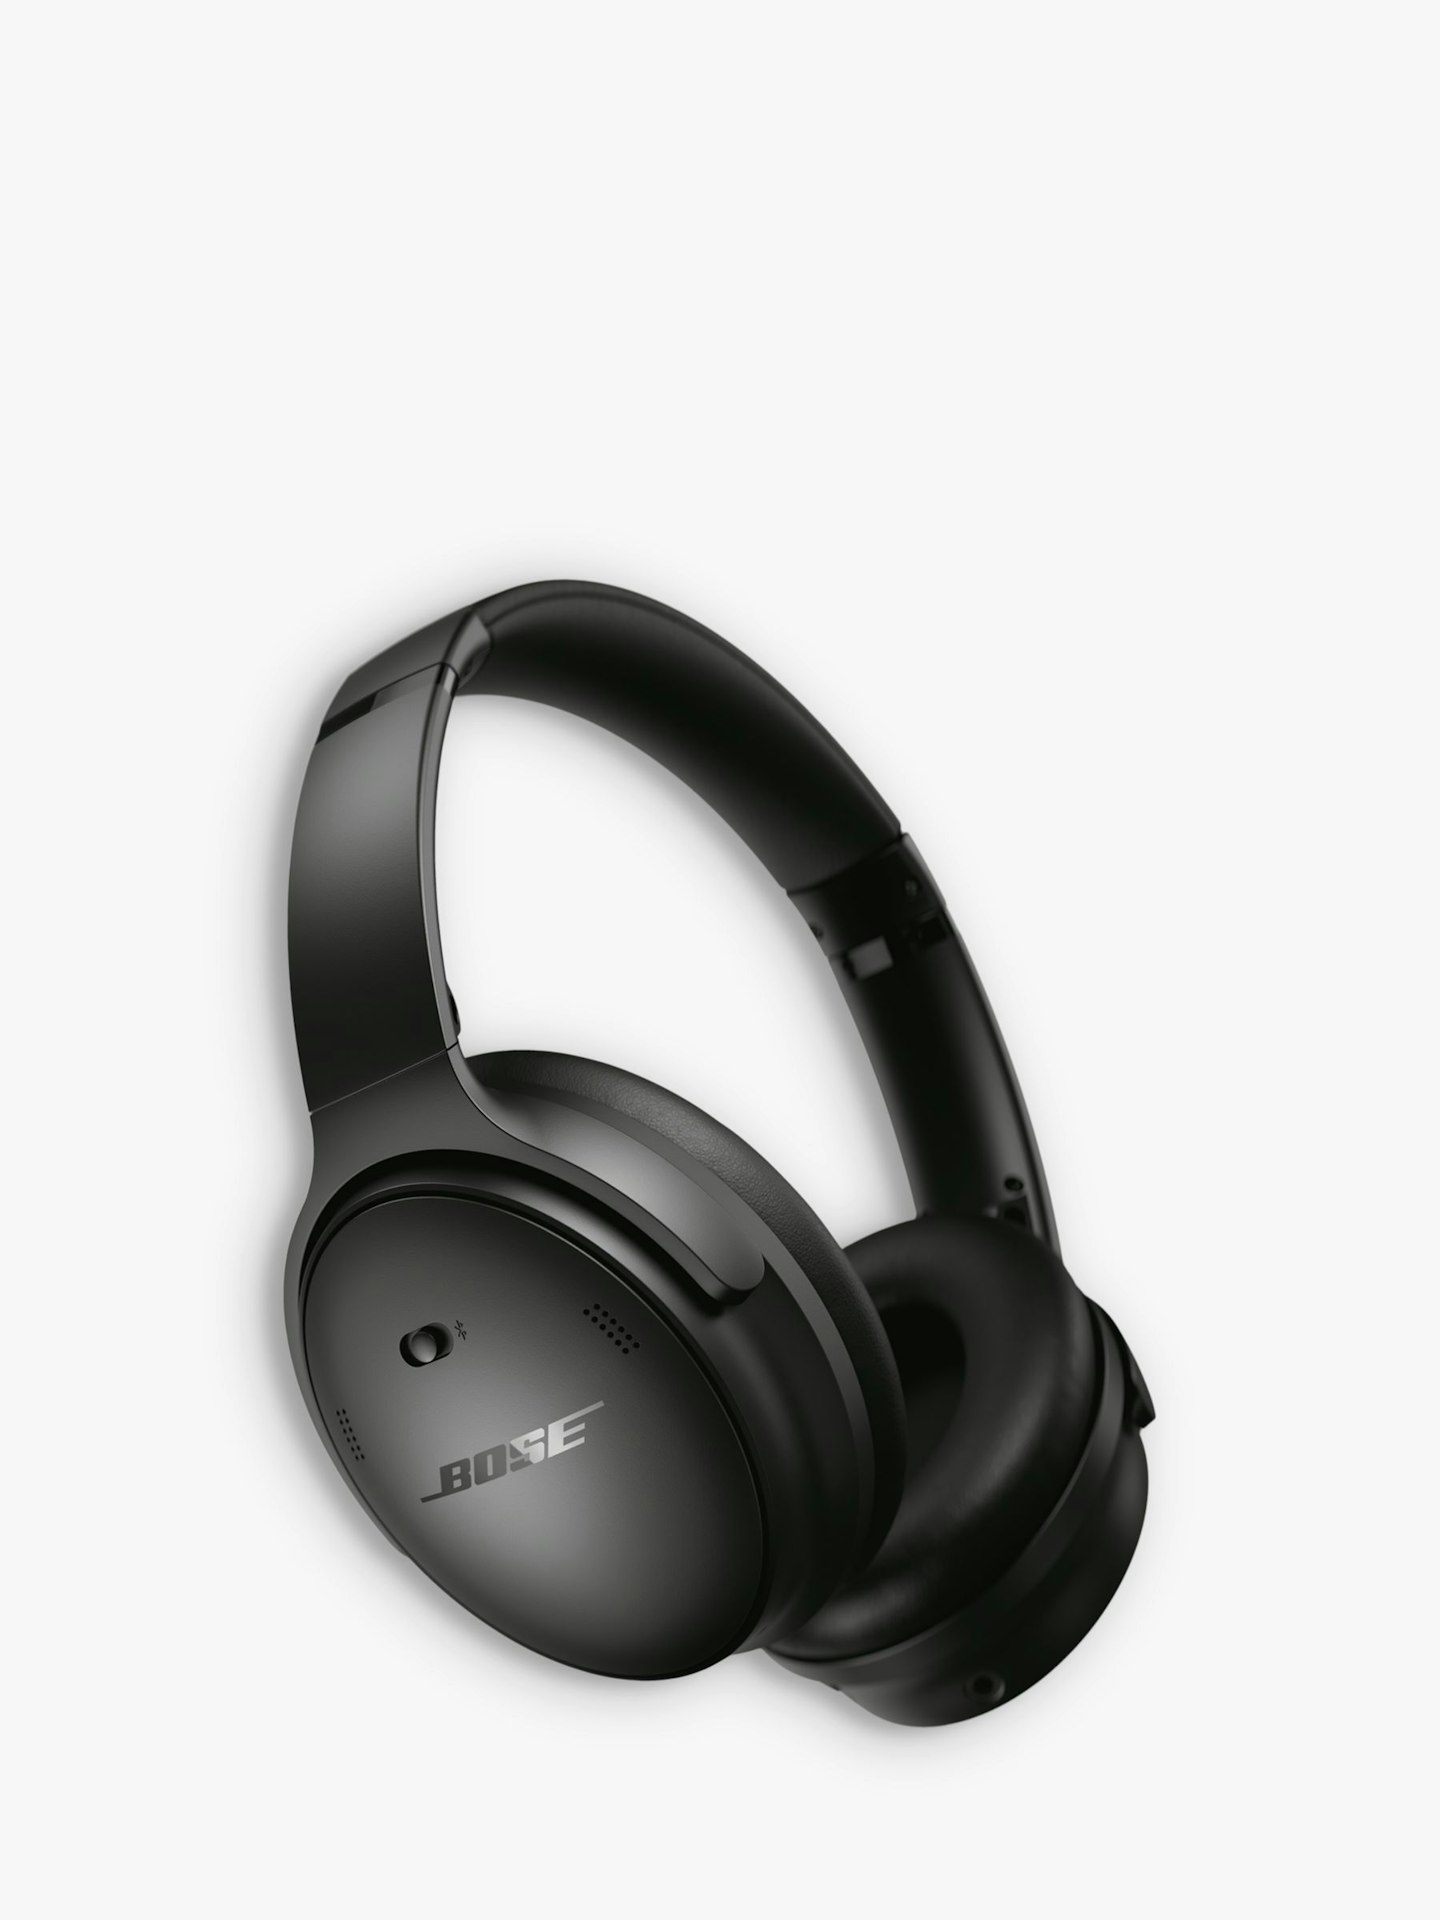 Bose QuietComfort SC Noise Cancelling Over-Ear Wireless Bluetooth Headphones with Mic/Remote, Black